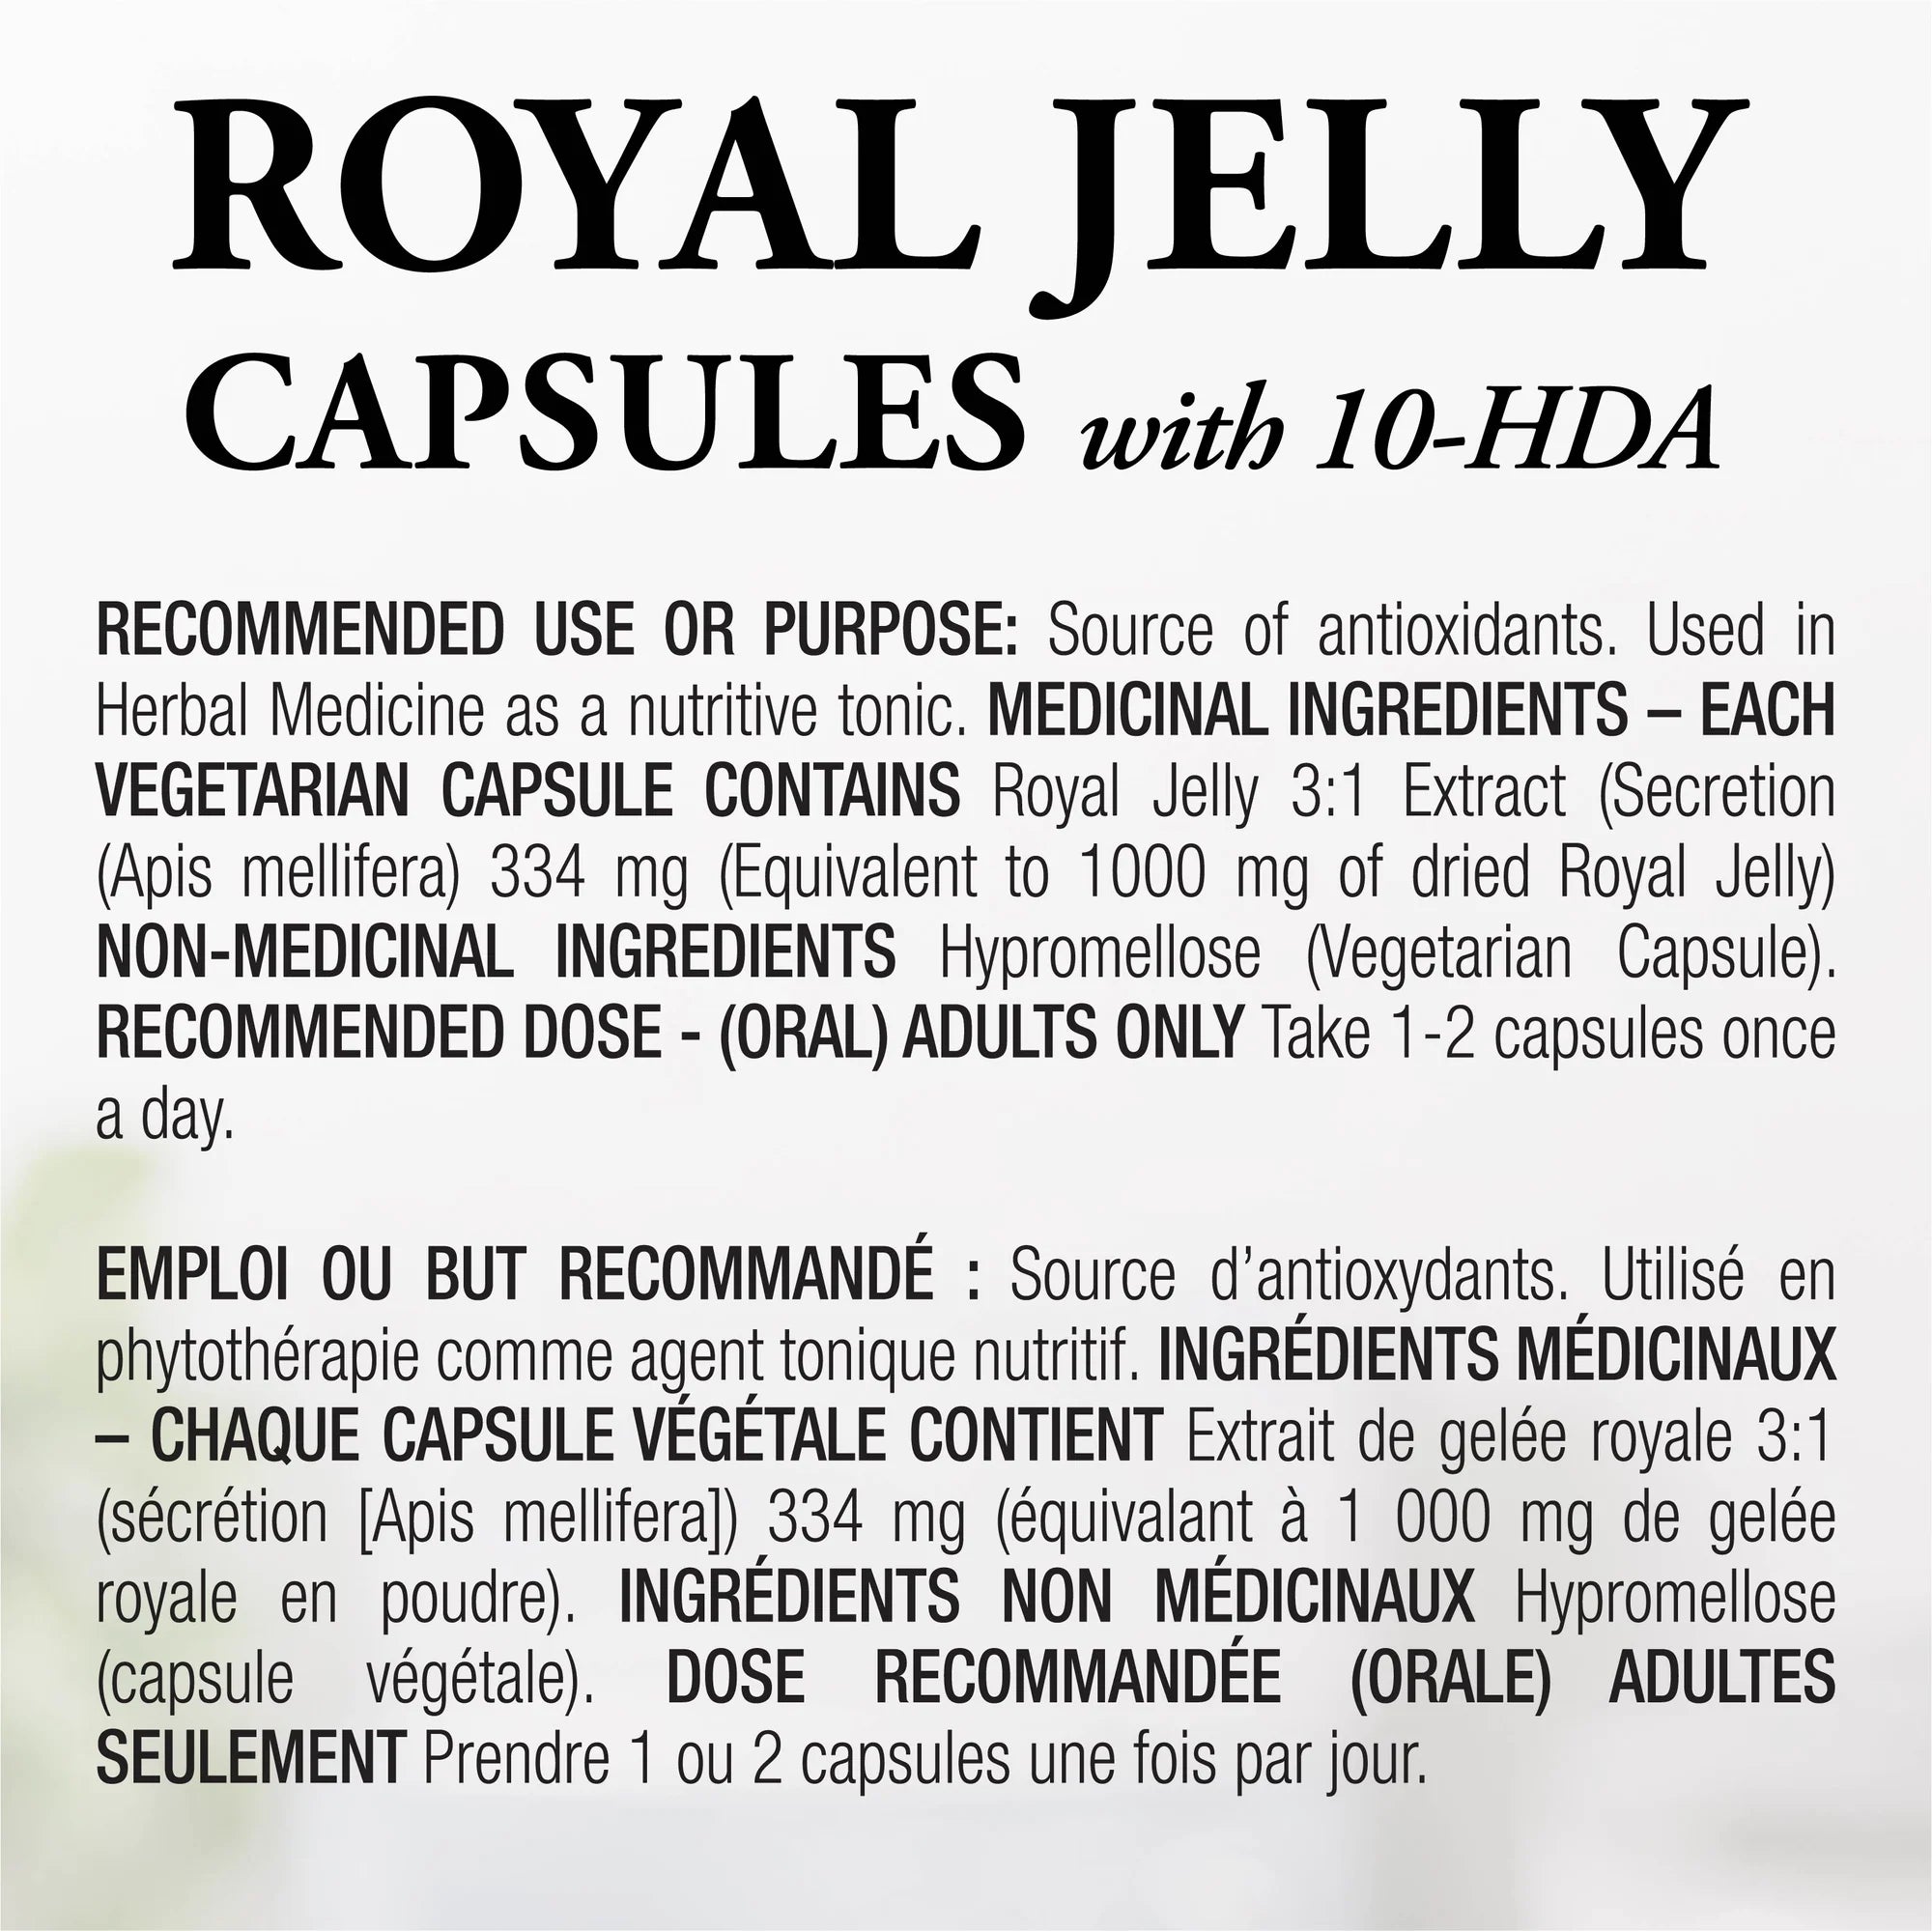 Royal Jelly Capsules 1000mg (90 Count) by Dutchman&